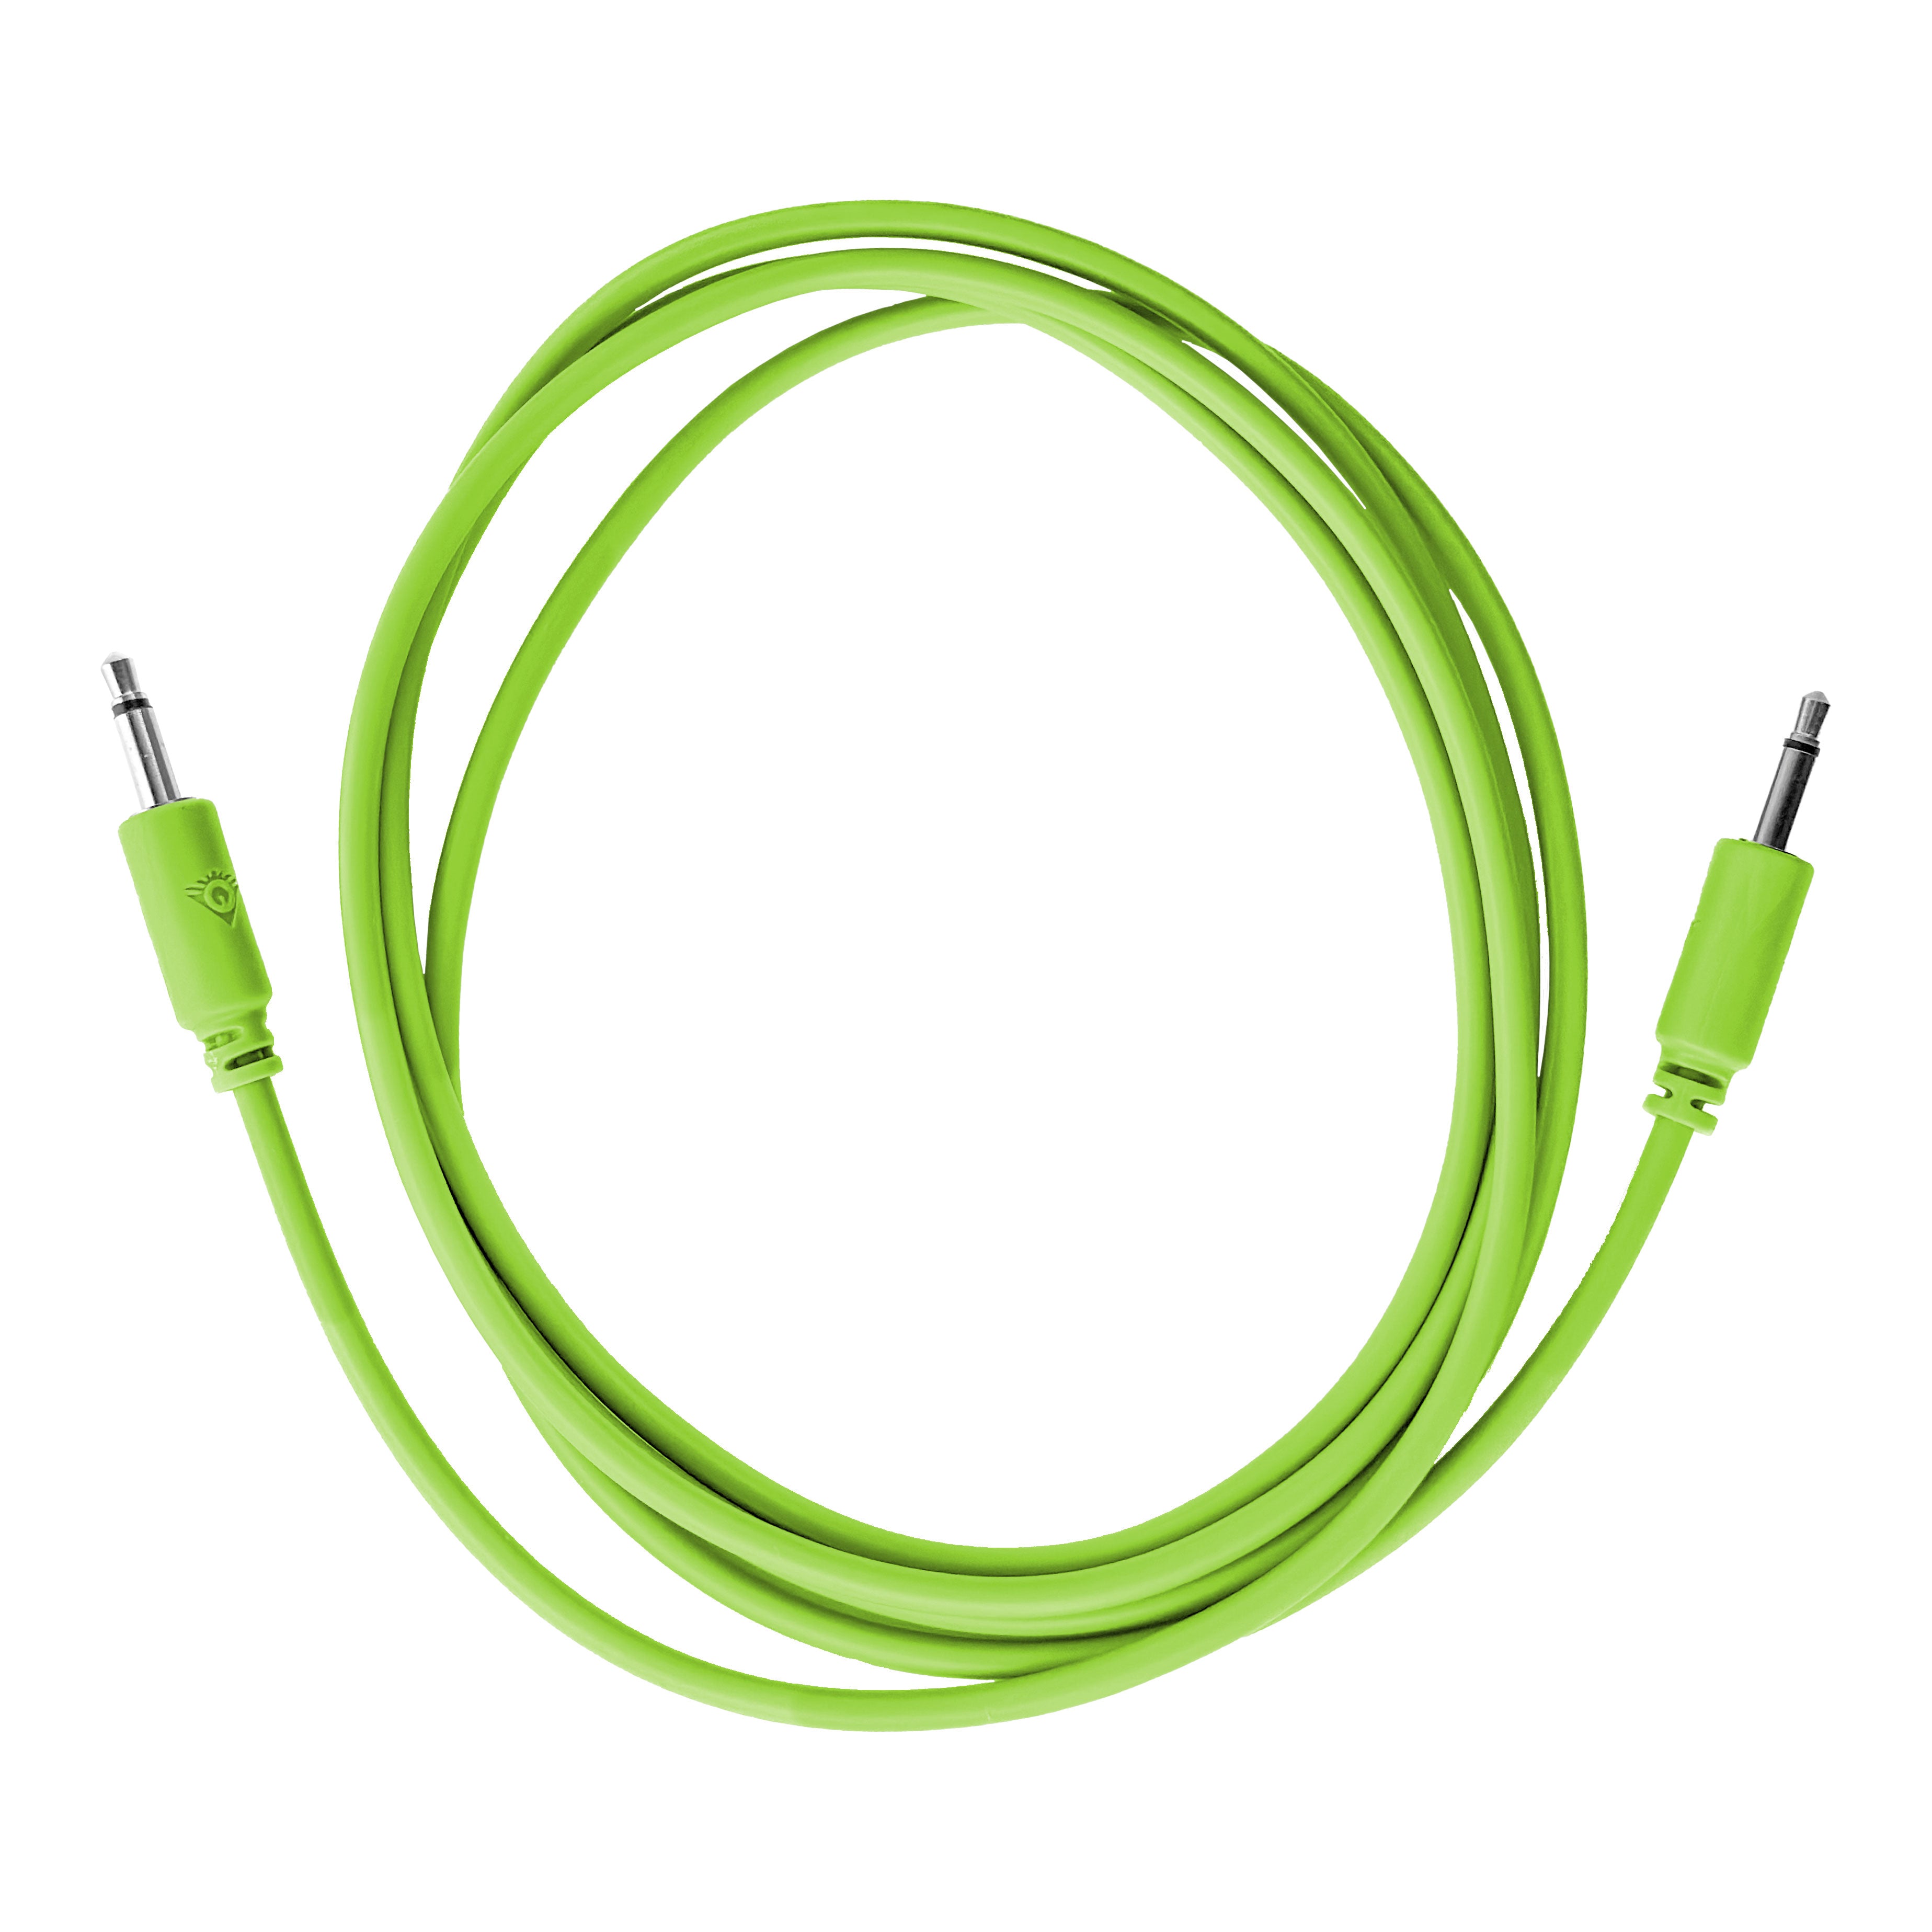 Black Market Modular 3.5mm Patch Cable - 150cm/60" - Glow in the Dark View 1